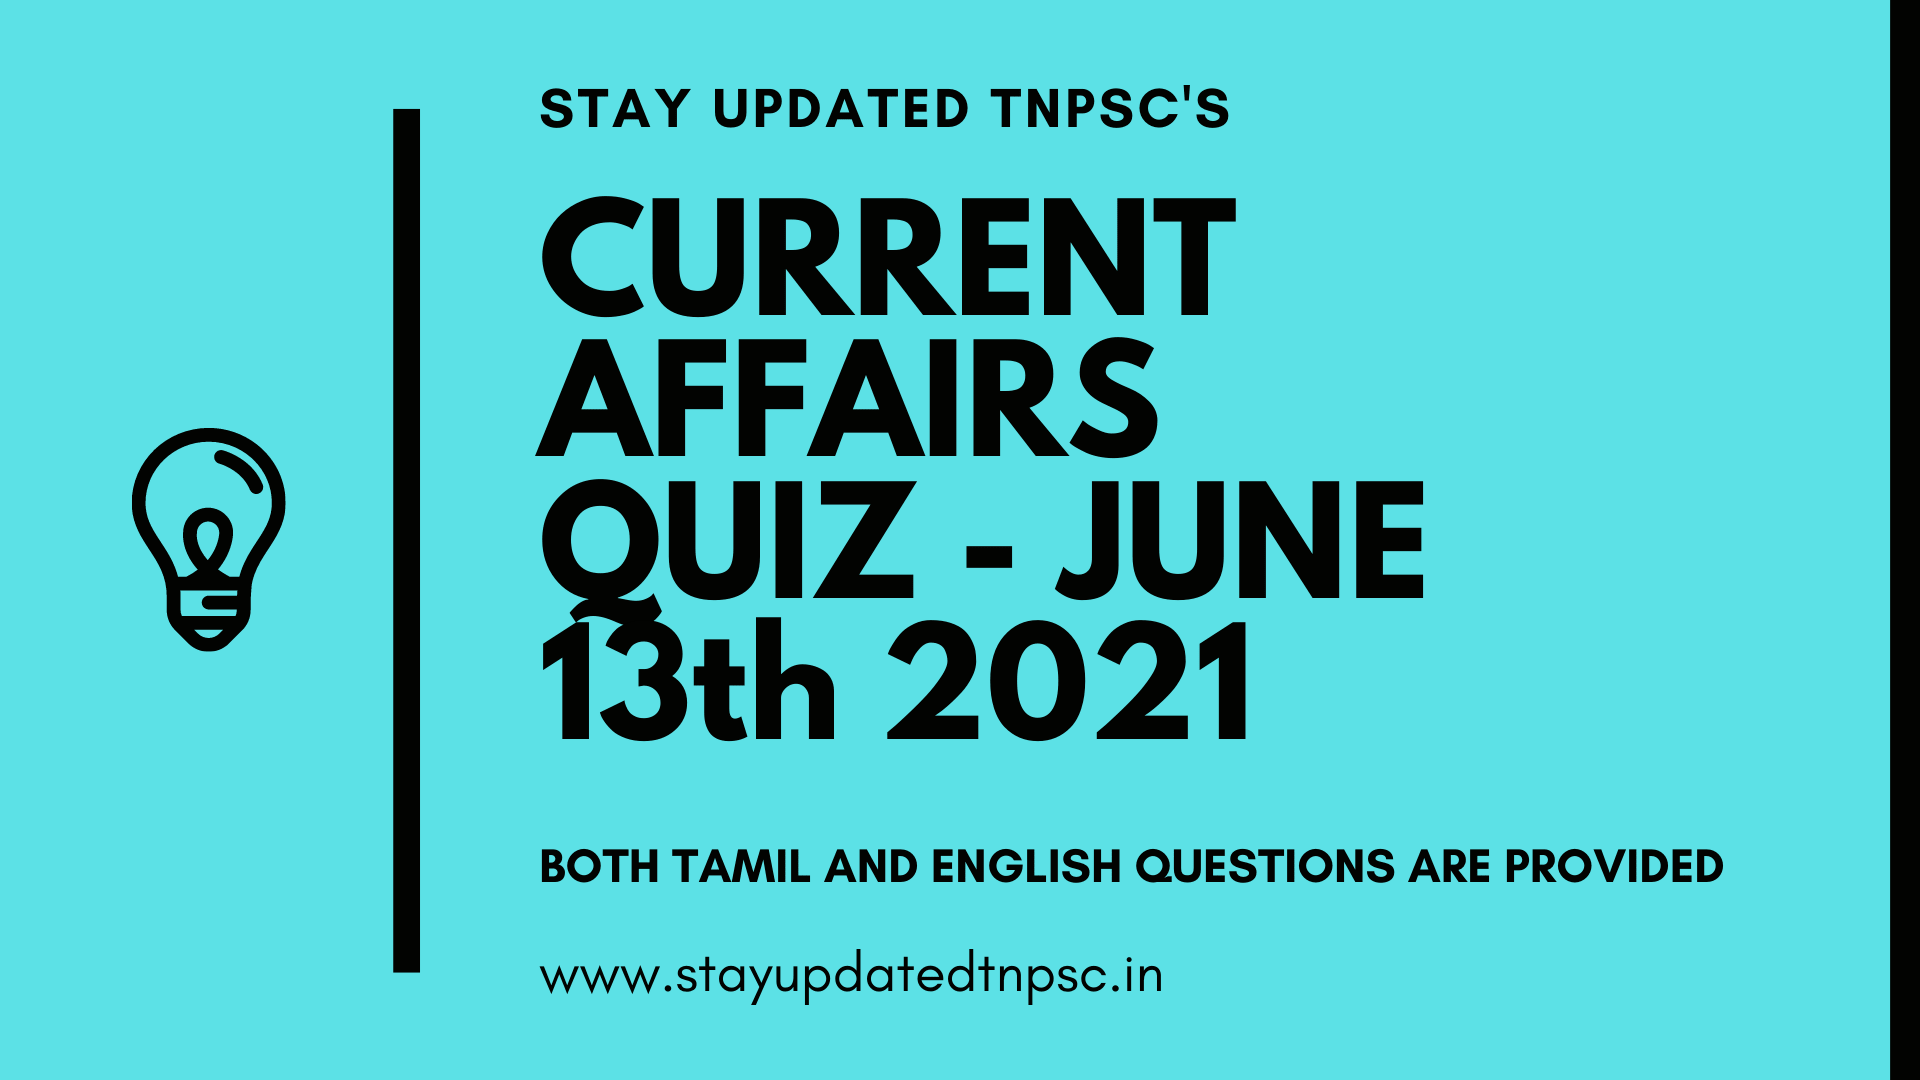 TNPSC DAILY CURRENT AFFAIRS: 13 JUNE 2021